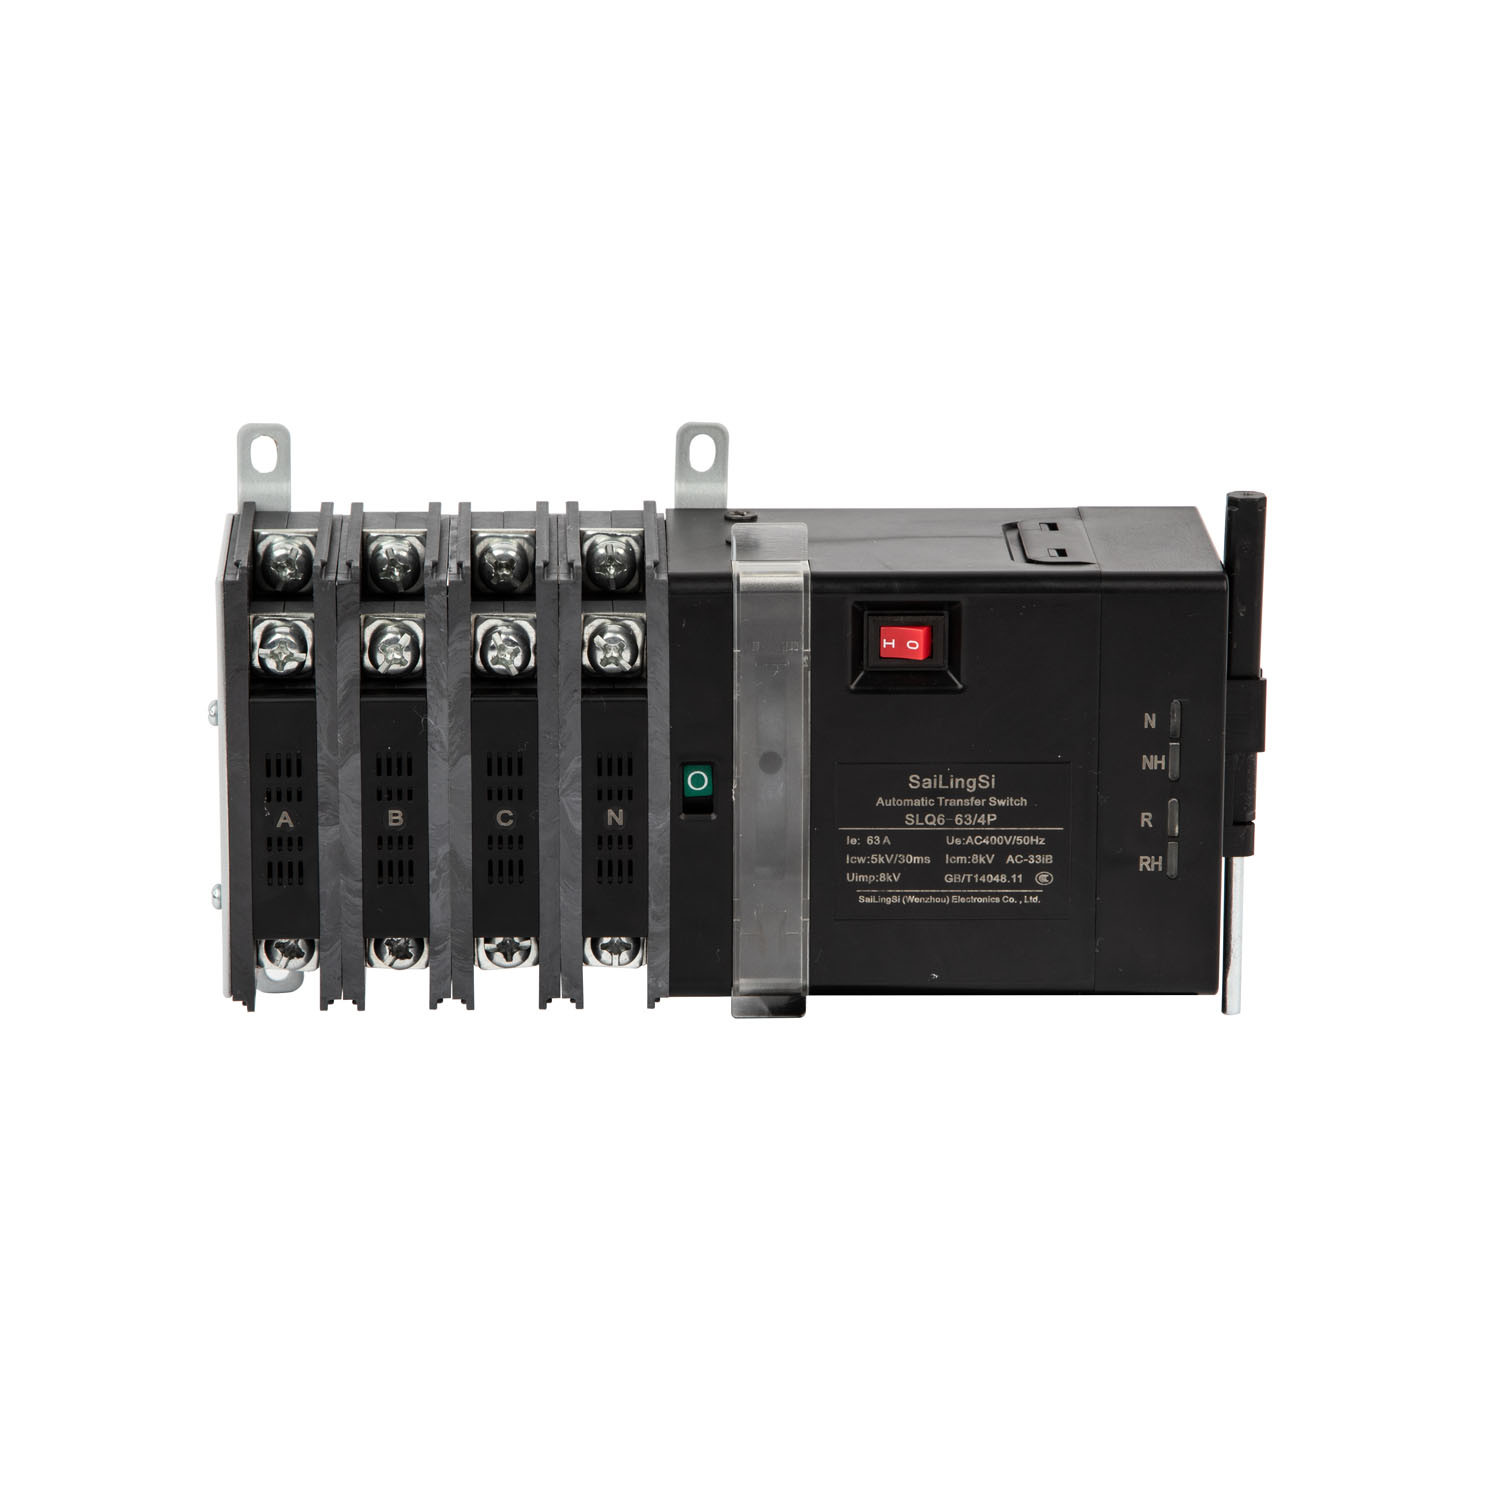 Solar Power to City Power ATS 630A 2p Automatic Transfer Switch ATS with Fire Control